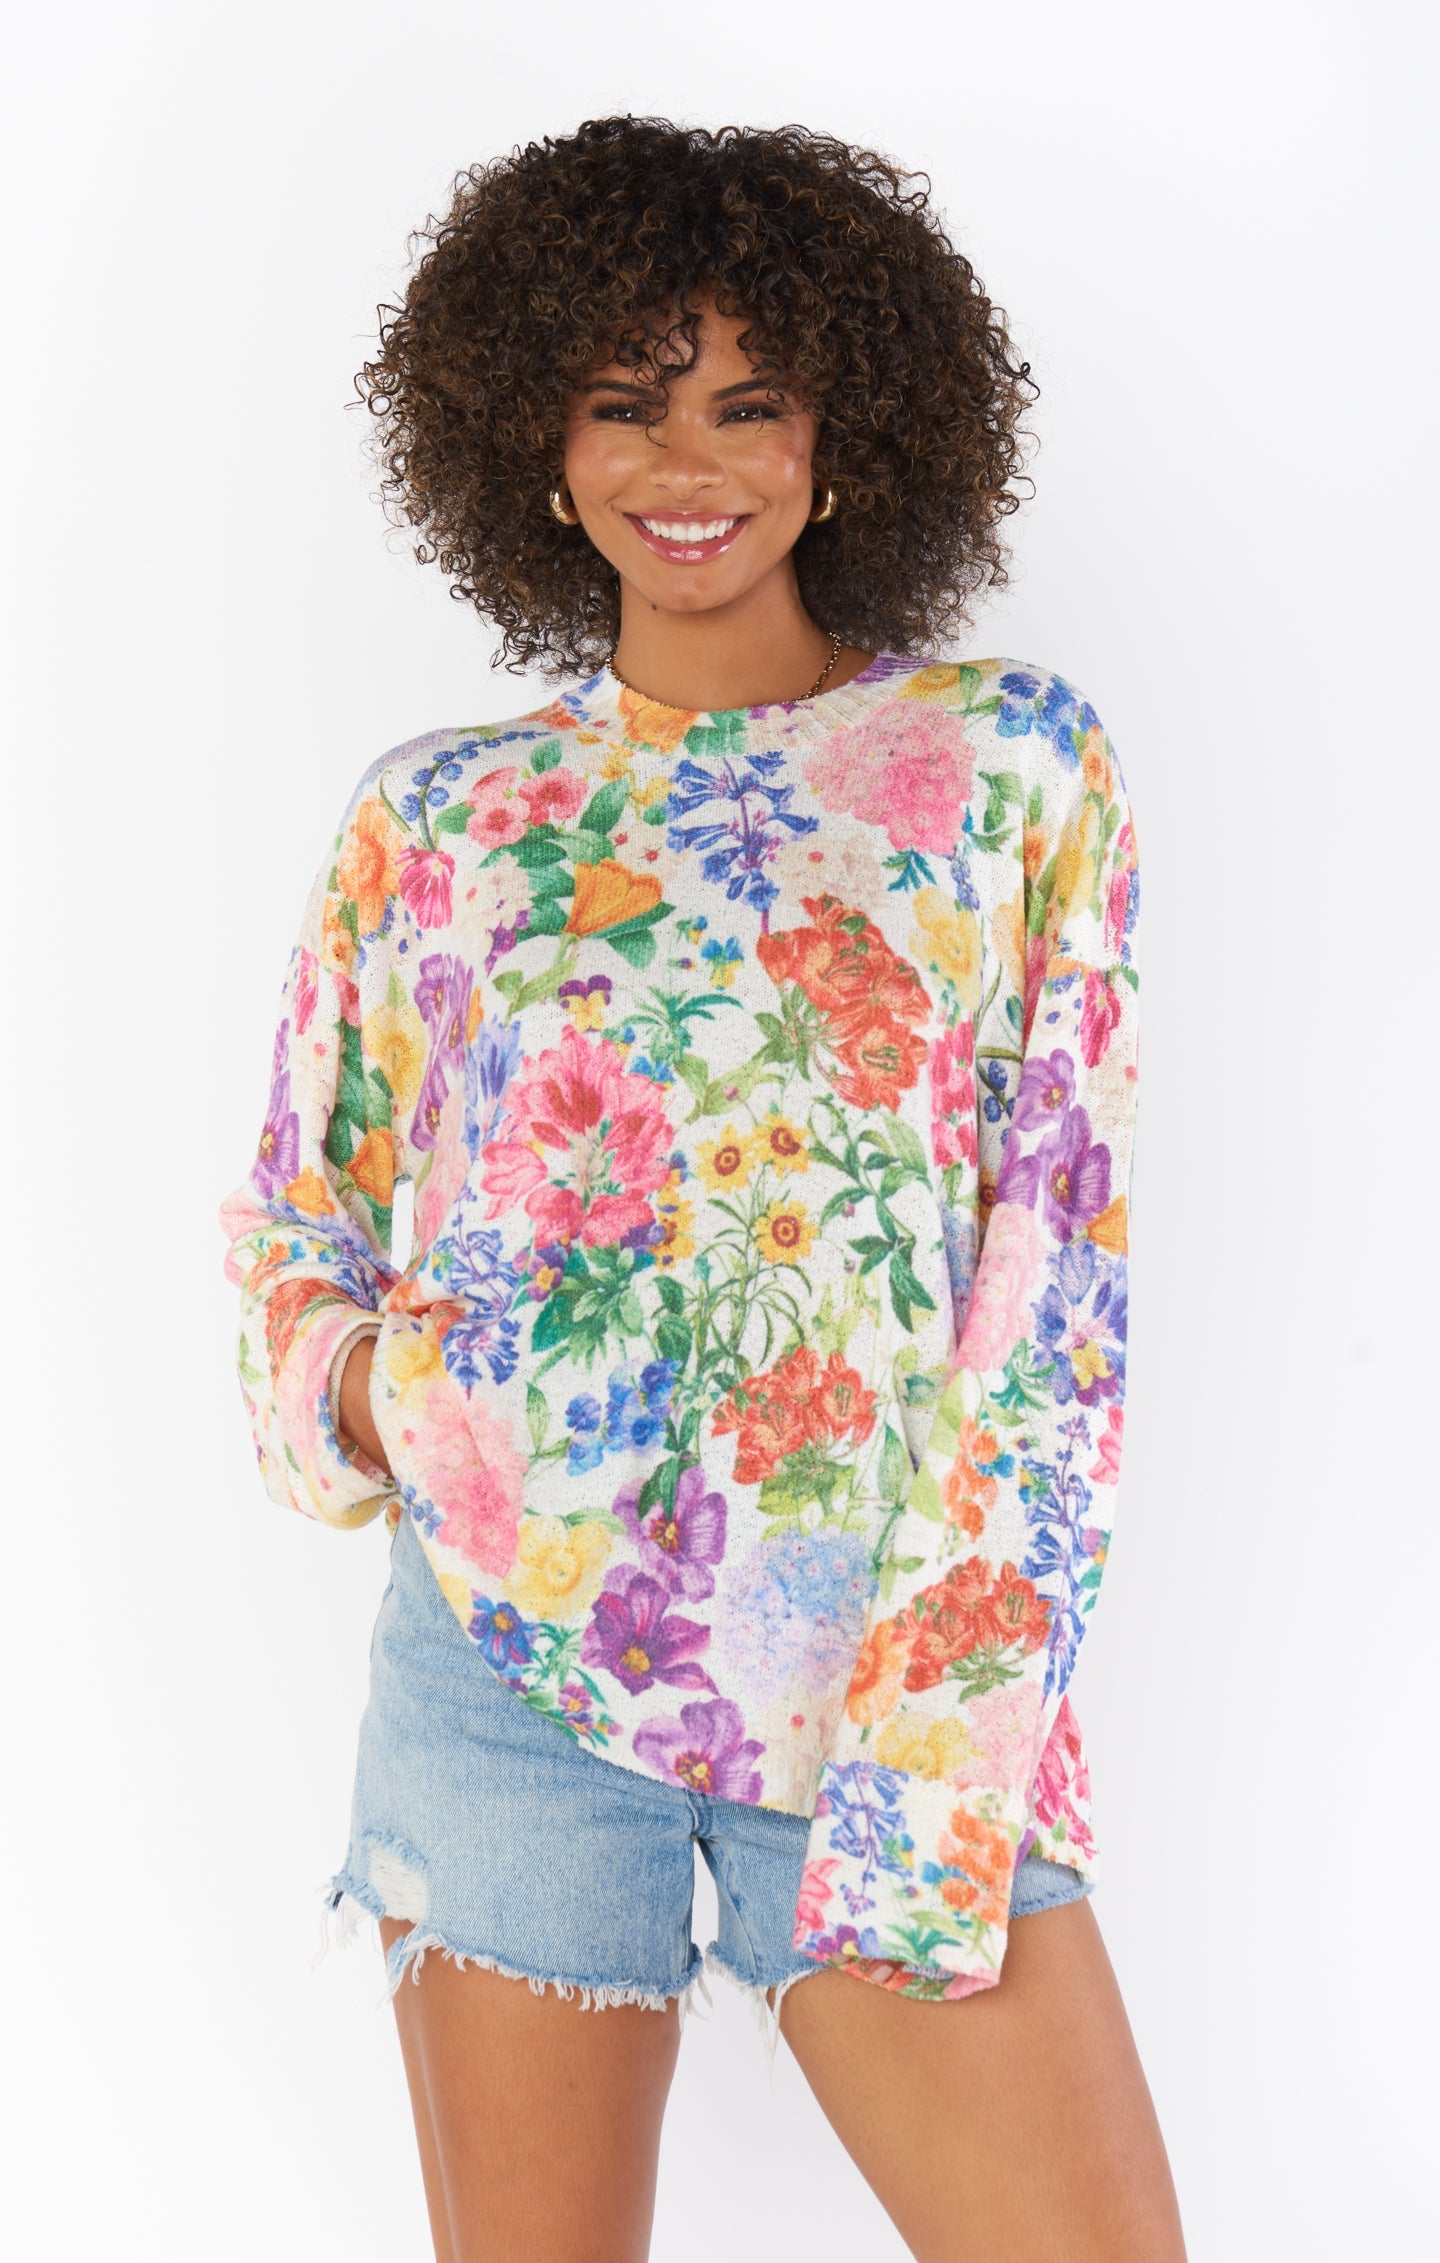 The Spring Floral Cuffed Sweater